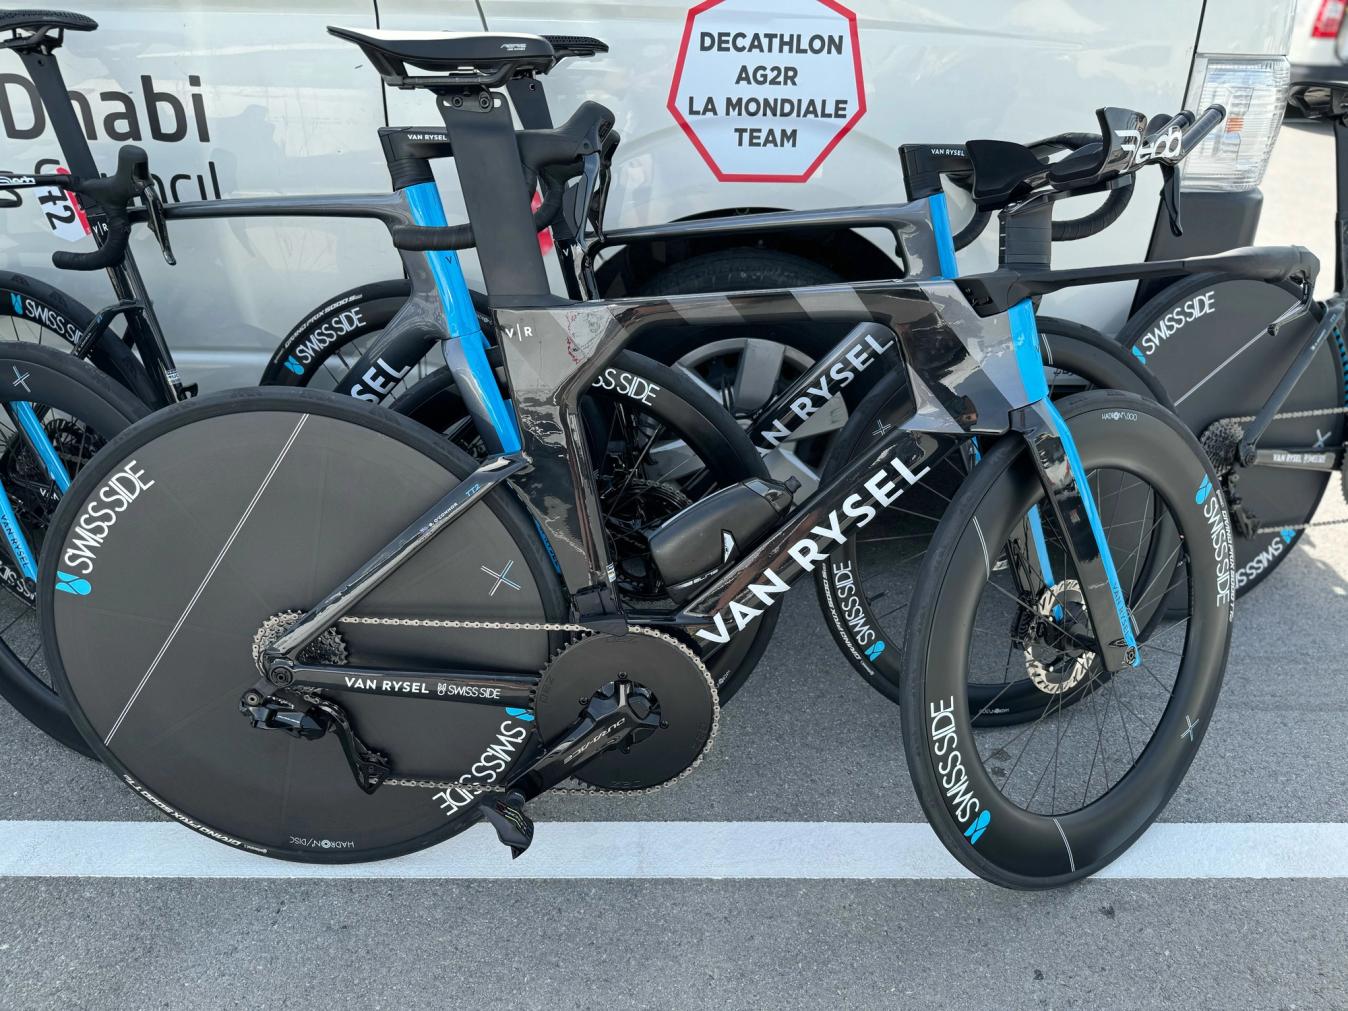 The Canyon Speedmax and most of its companions have been regulars at WorldTour level for a number of years now, but there was one new bike on show in the form of Van Rysel’s XCR.